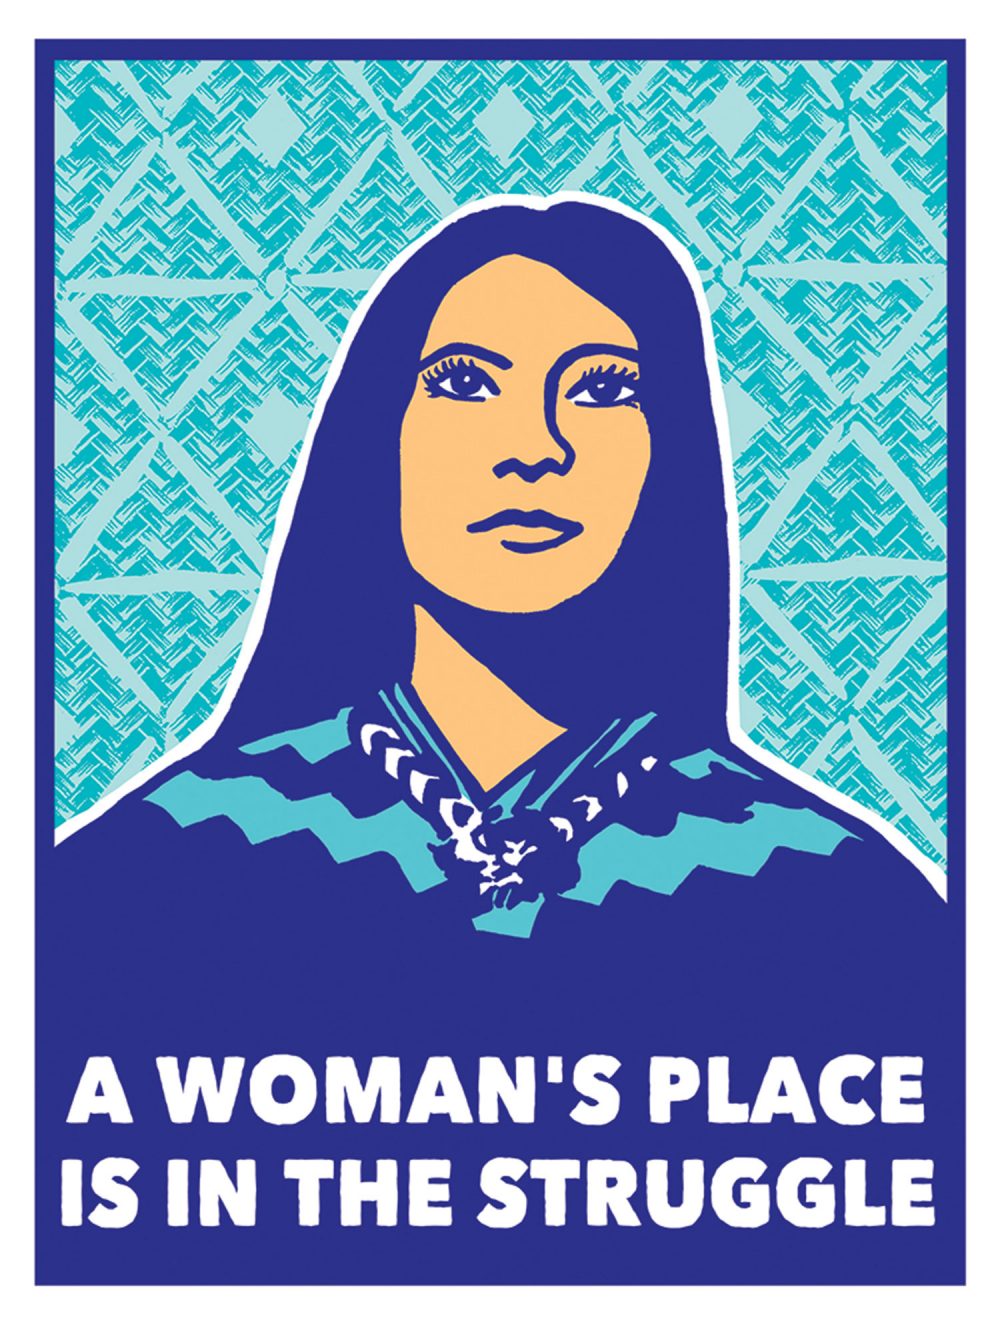 Melanie Cervantes, “A Woman’s Place is in the Struggle.” (Courtesy Massachusetts College of Art and Design)